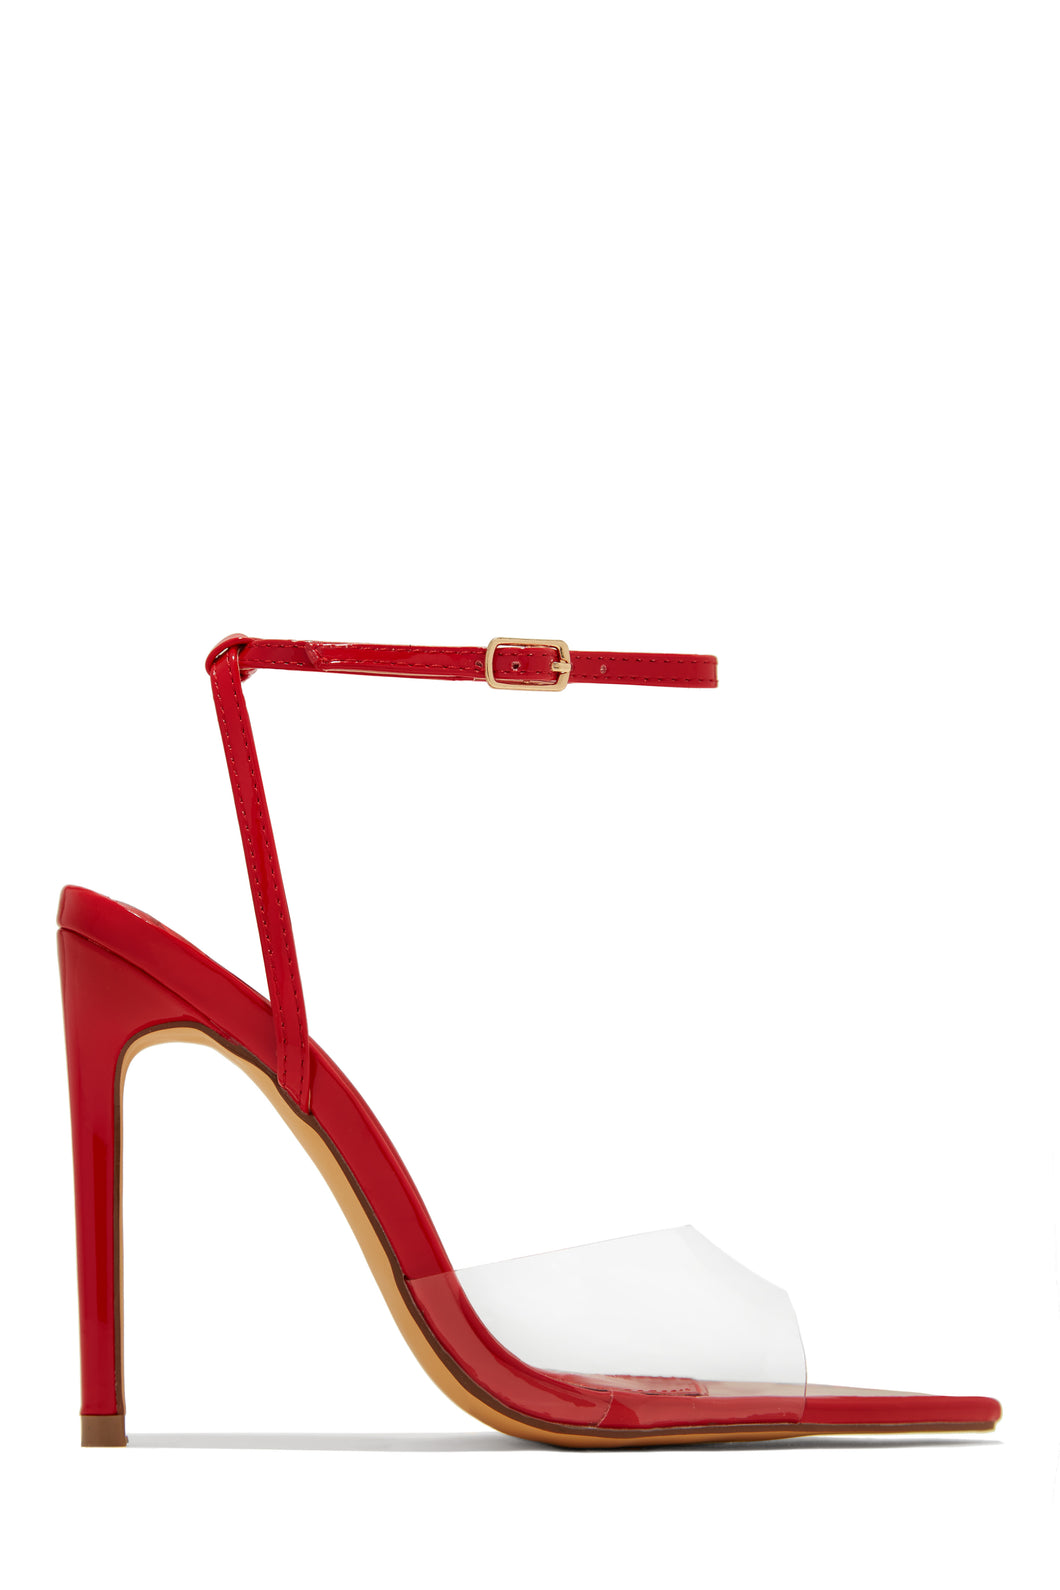 Dinner Date Clear Strap High Heels - Red